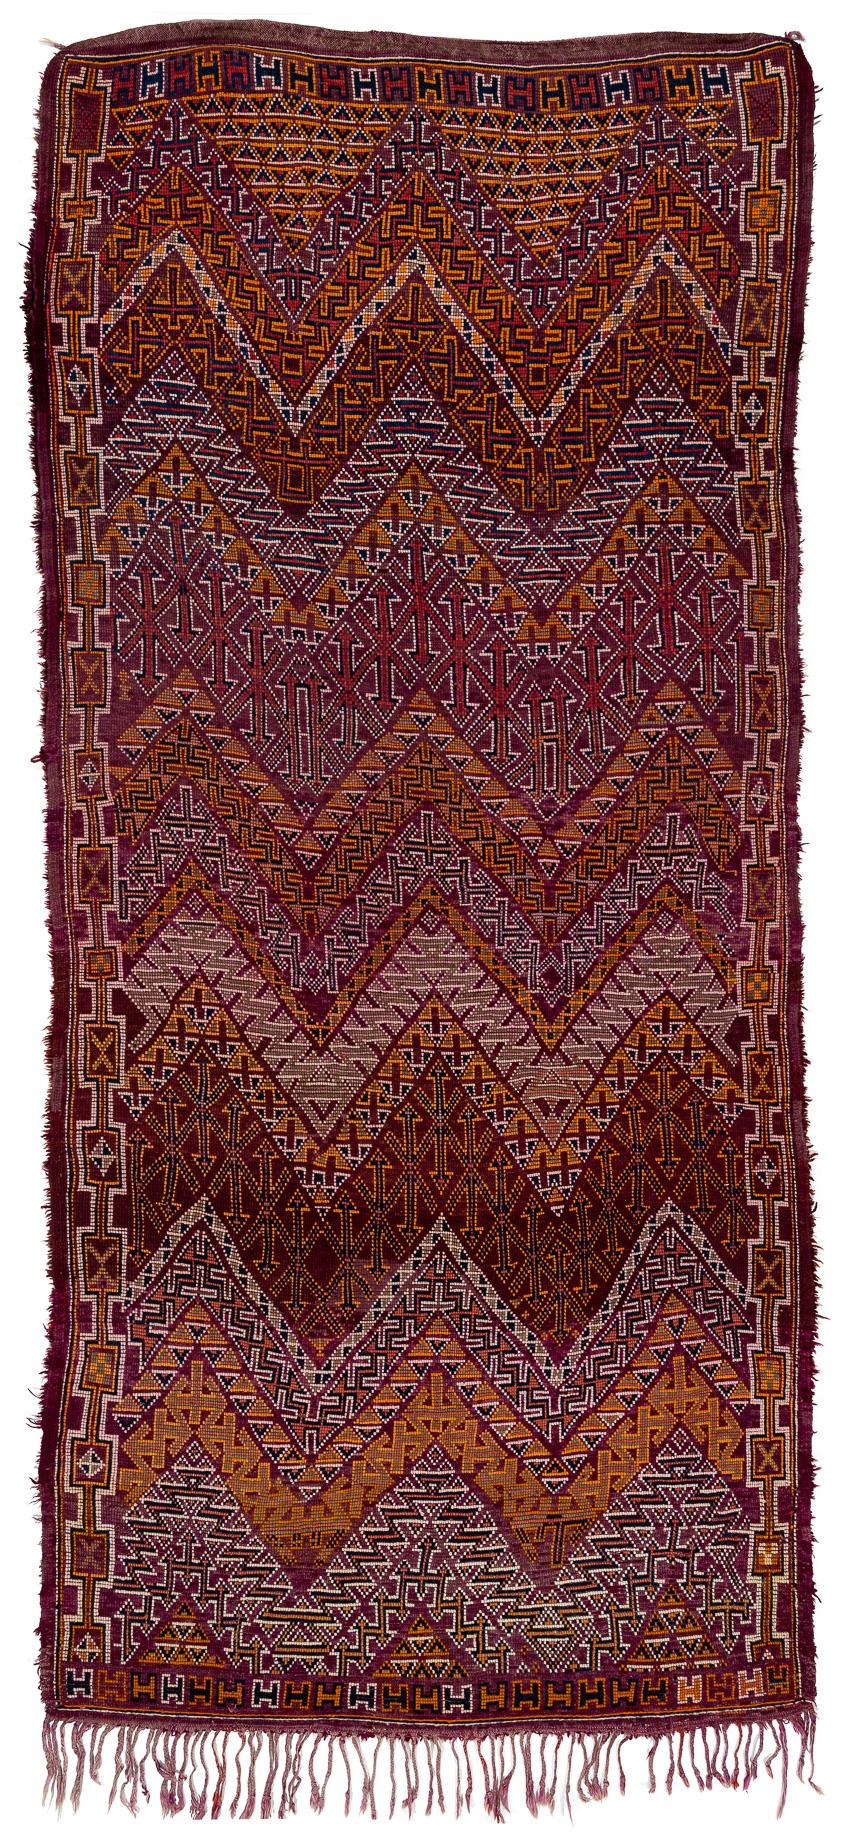 This vintage Moroccan rug is in perfect condition with a very dense structure. It is a monumental rug and was certainly made and used as a prestige carpet for special occasions only. Woven in deep maroon wool with pops of orange and blue